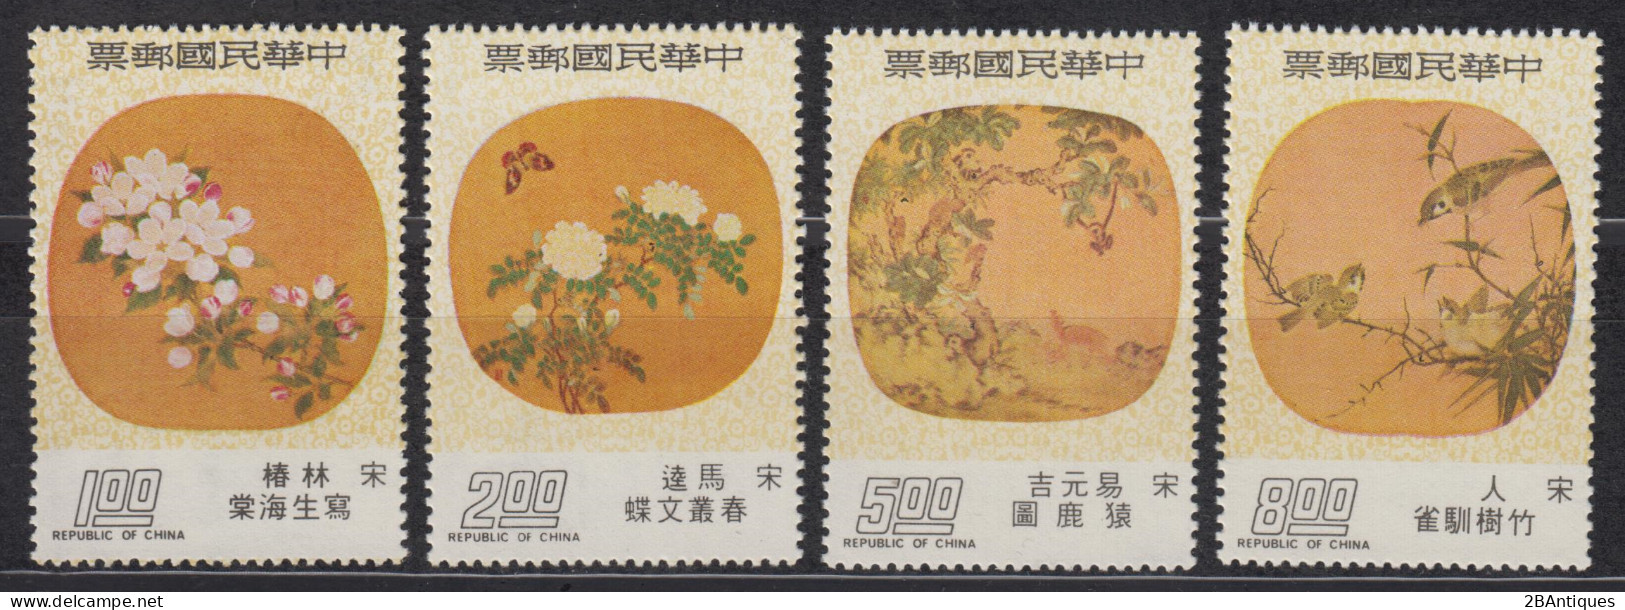 TAIWAN 1975 - Ancient Chinese Moon-shaped Fan Paintings MNH** OG XF - Unused Stamps